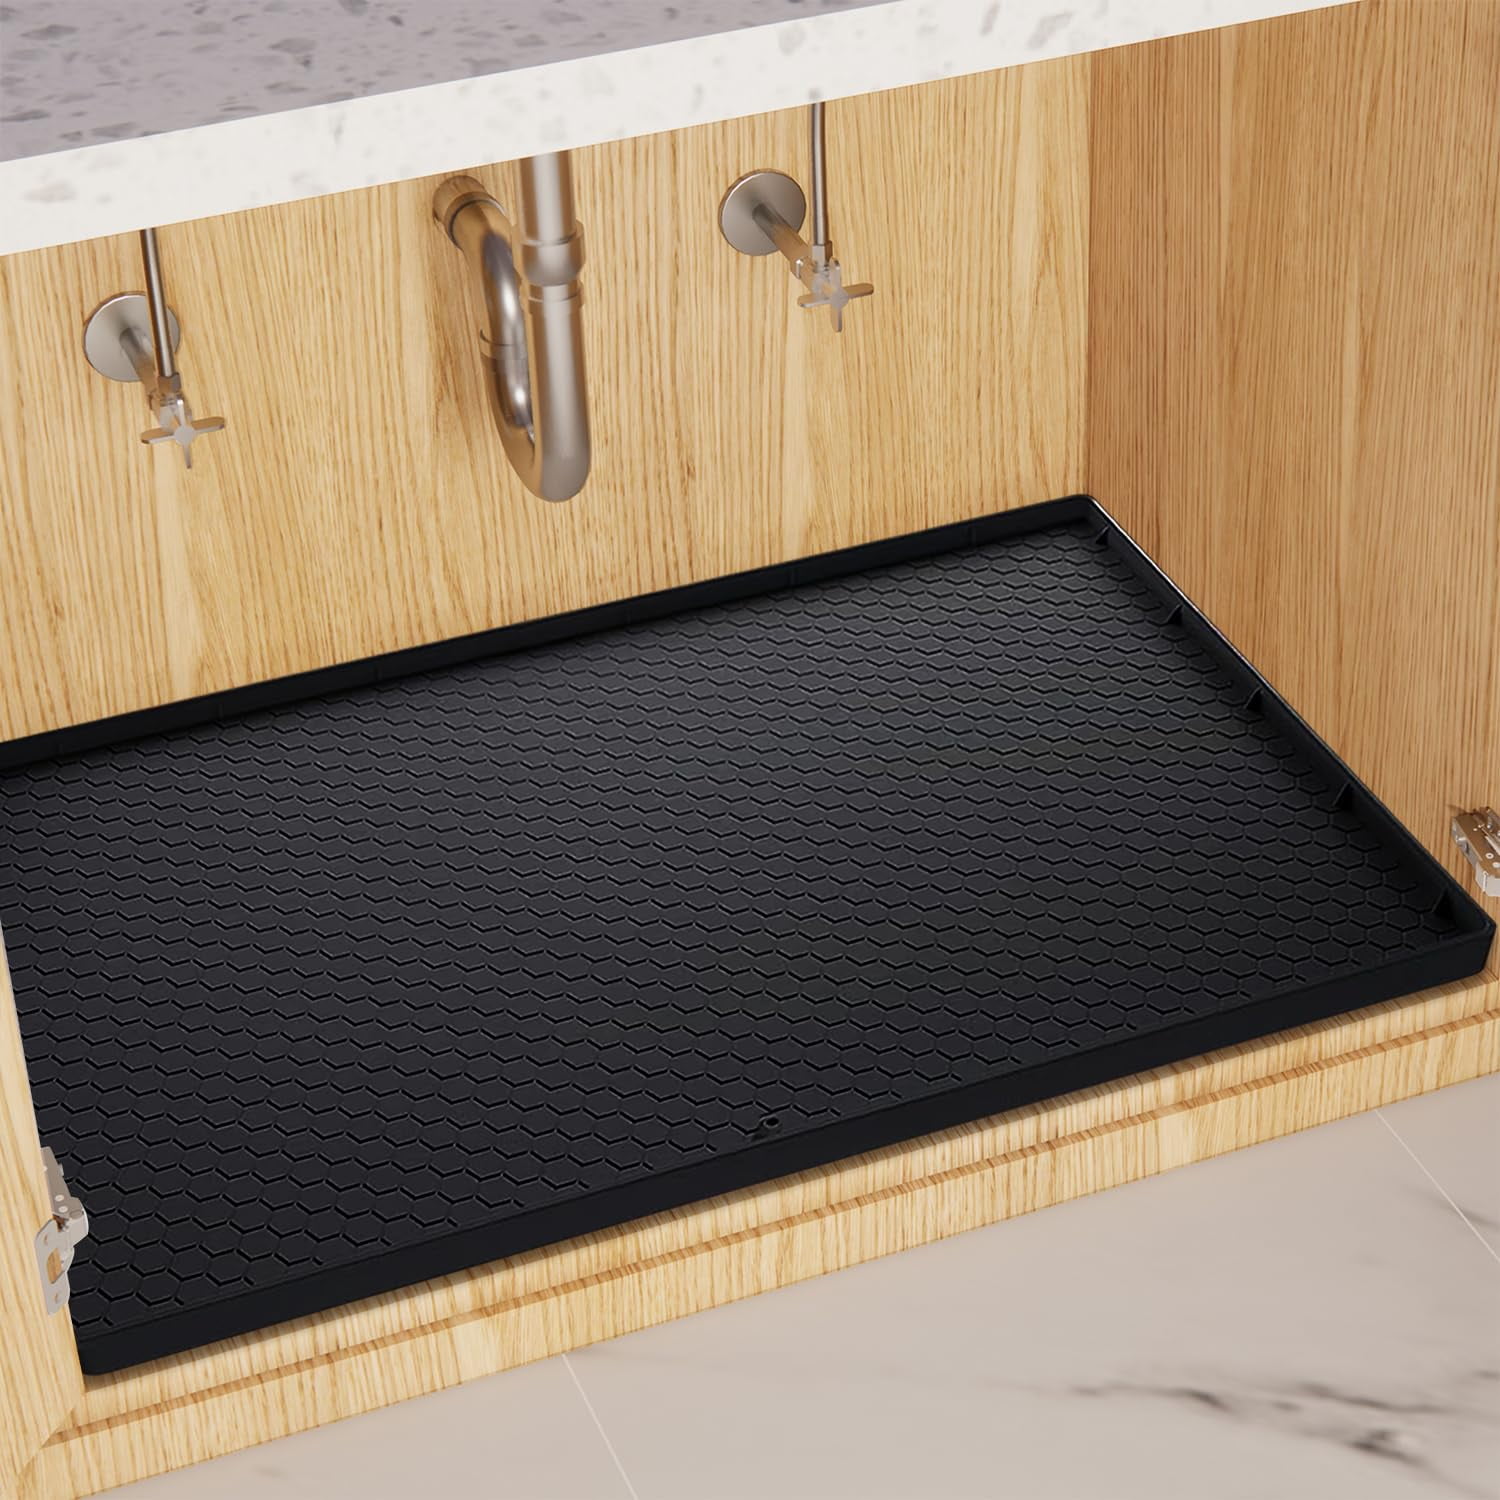 Xtreme Mats Kitchen 22-in x 22-in Grey Undersink Drip Tray Fits Cabinet  Size 22-in x 22-in